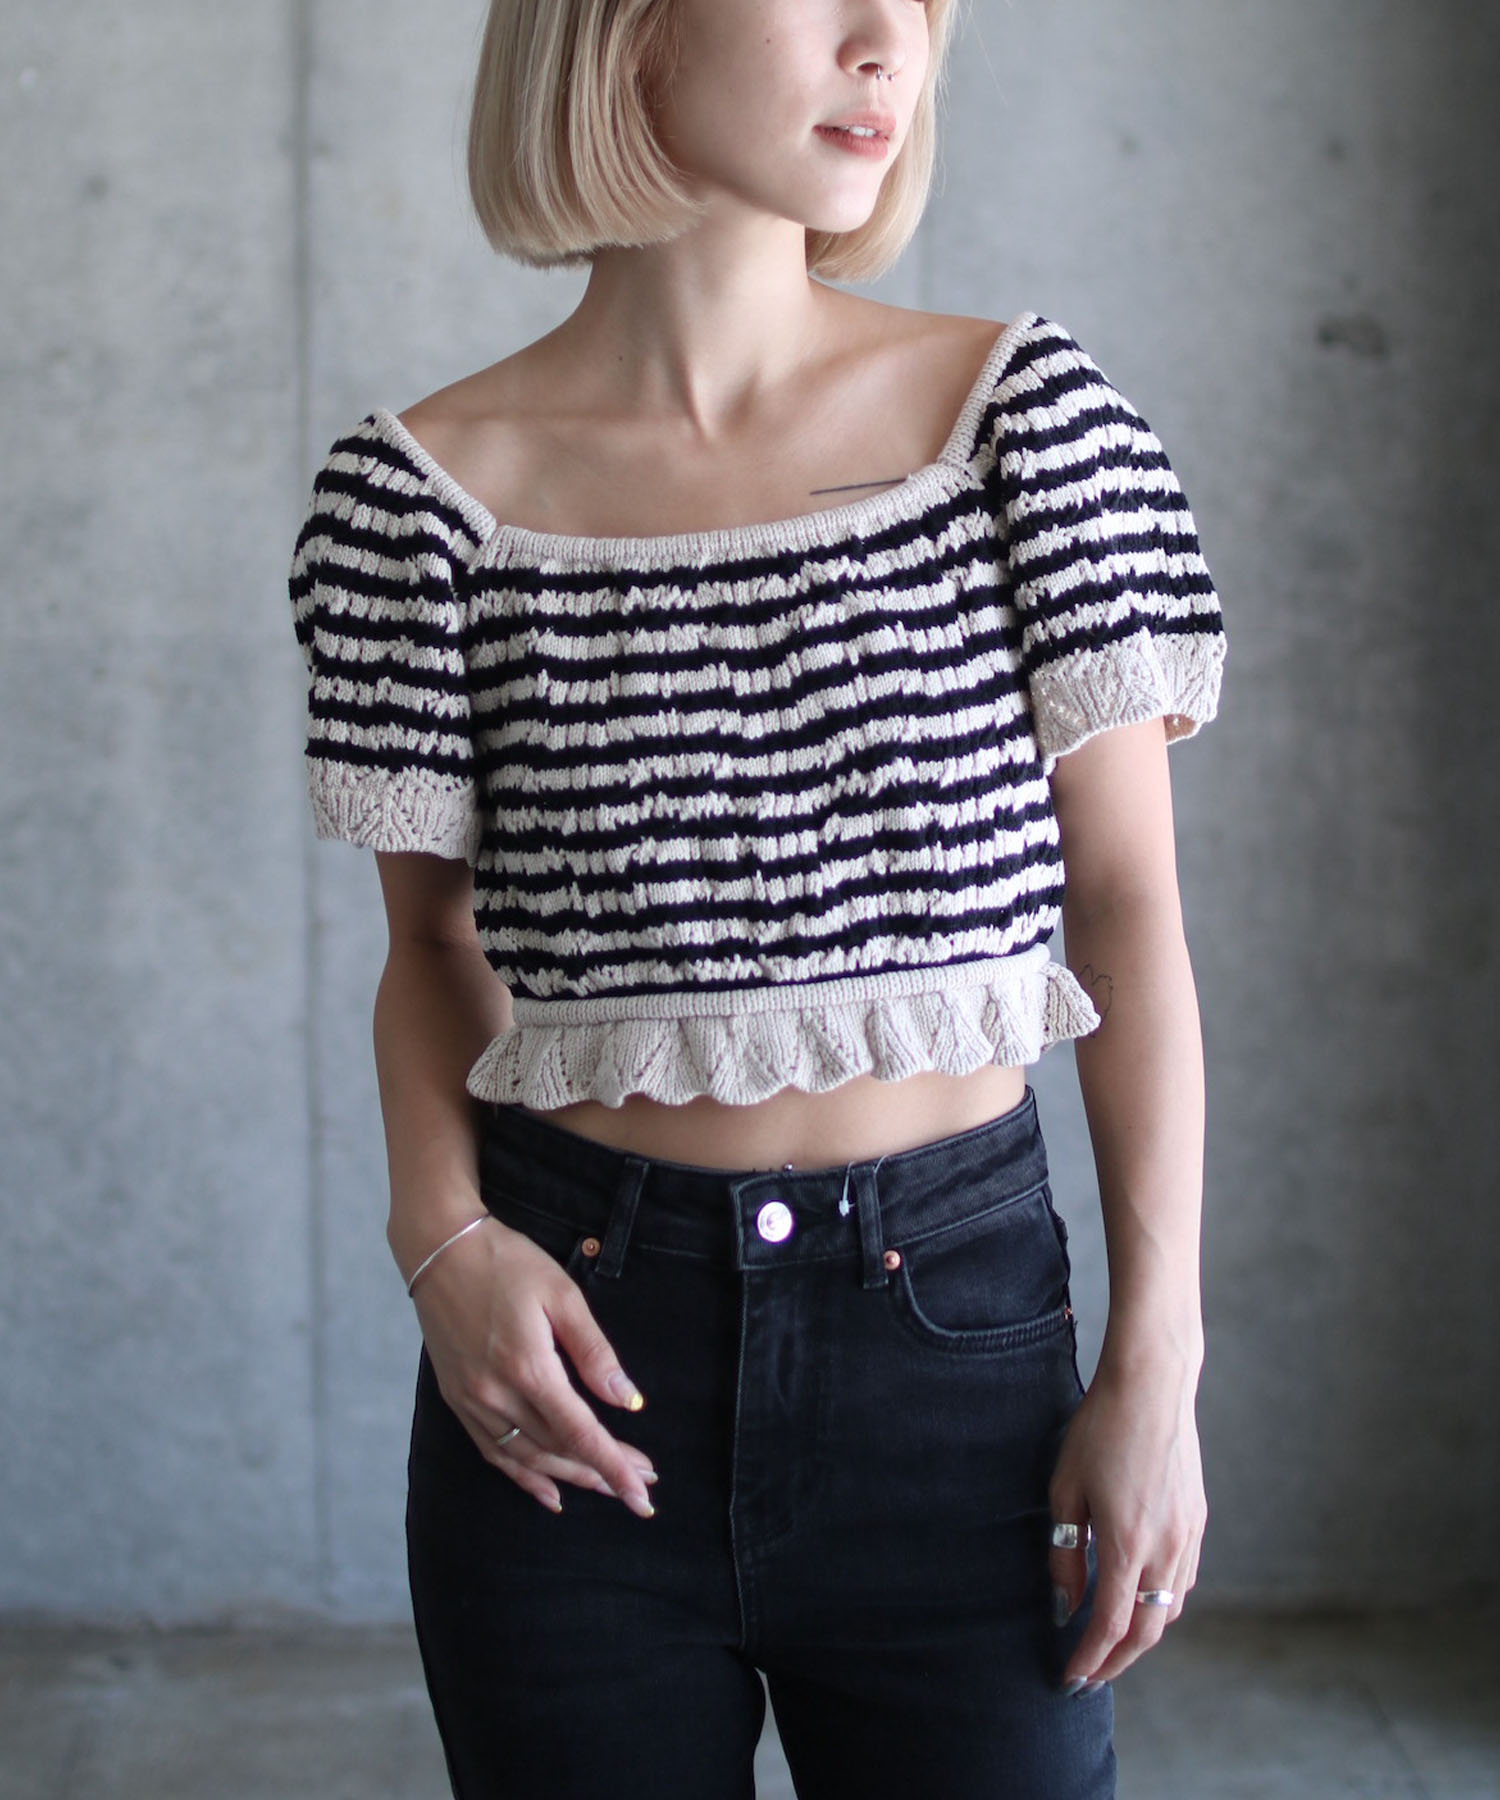 Mimi knitted top